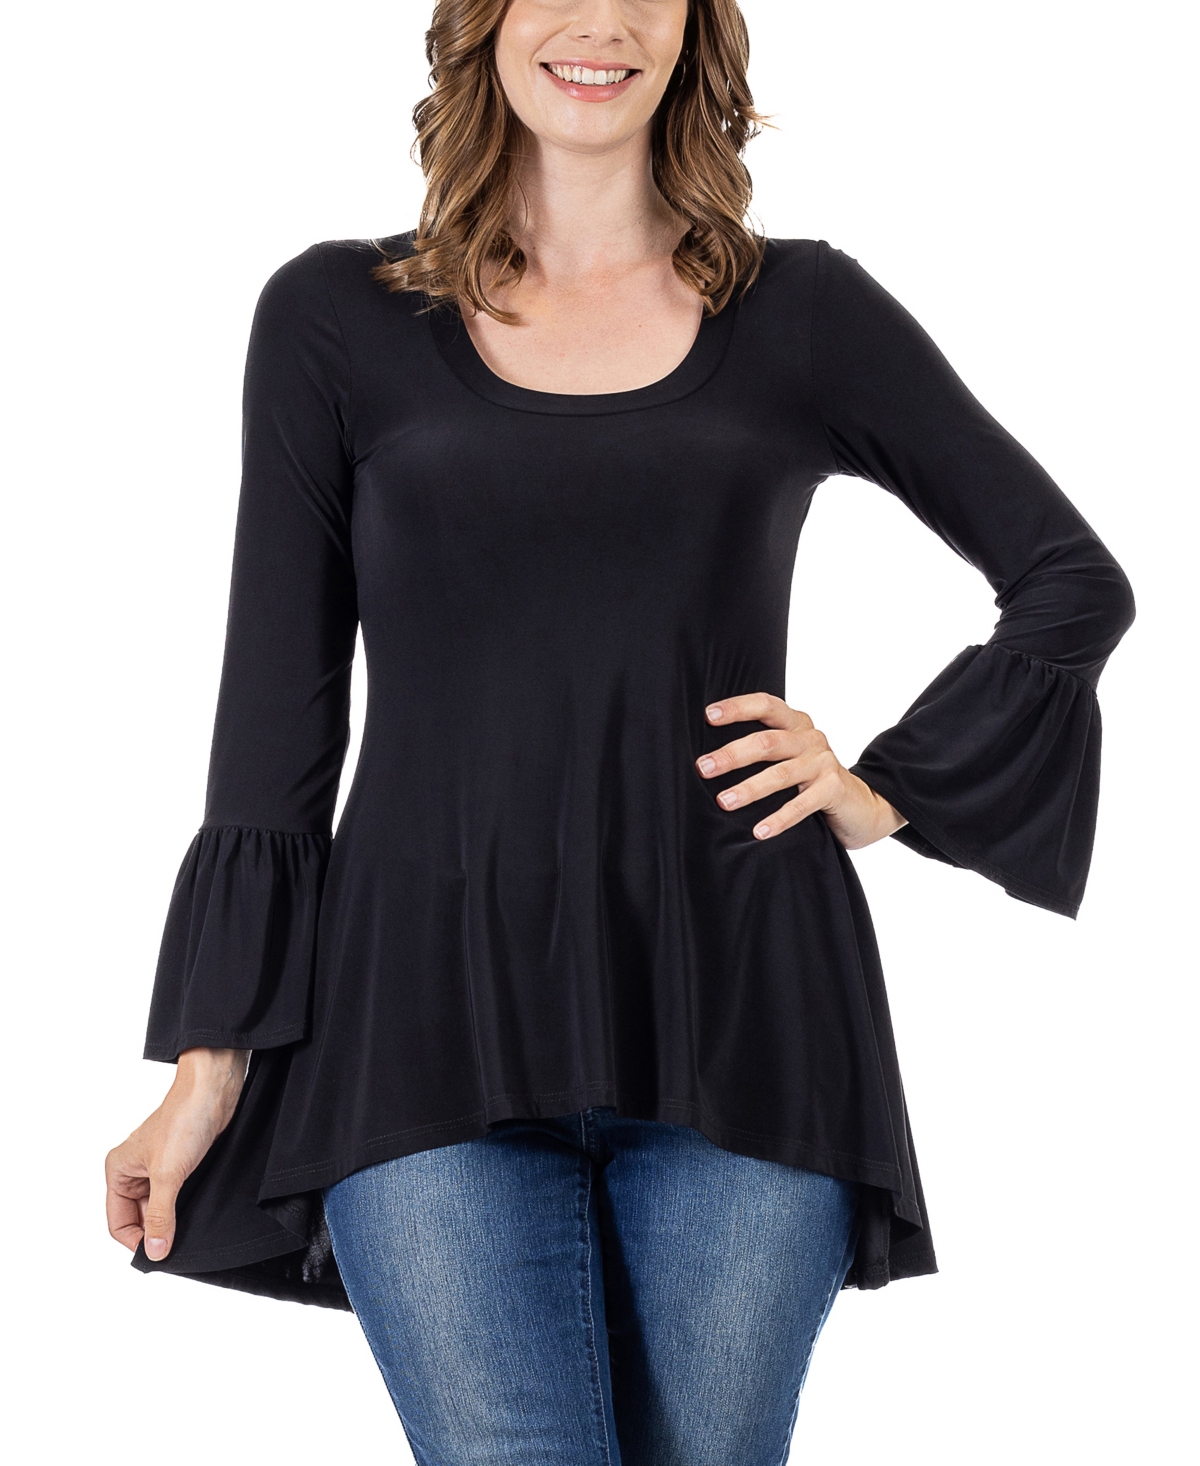 24seven Comfort Apparel Women's Long Bell Sleeve High Low Tunic Top In Black